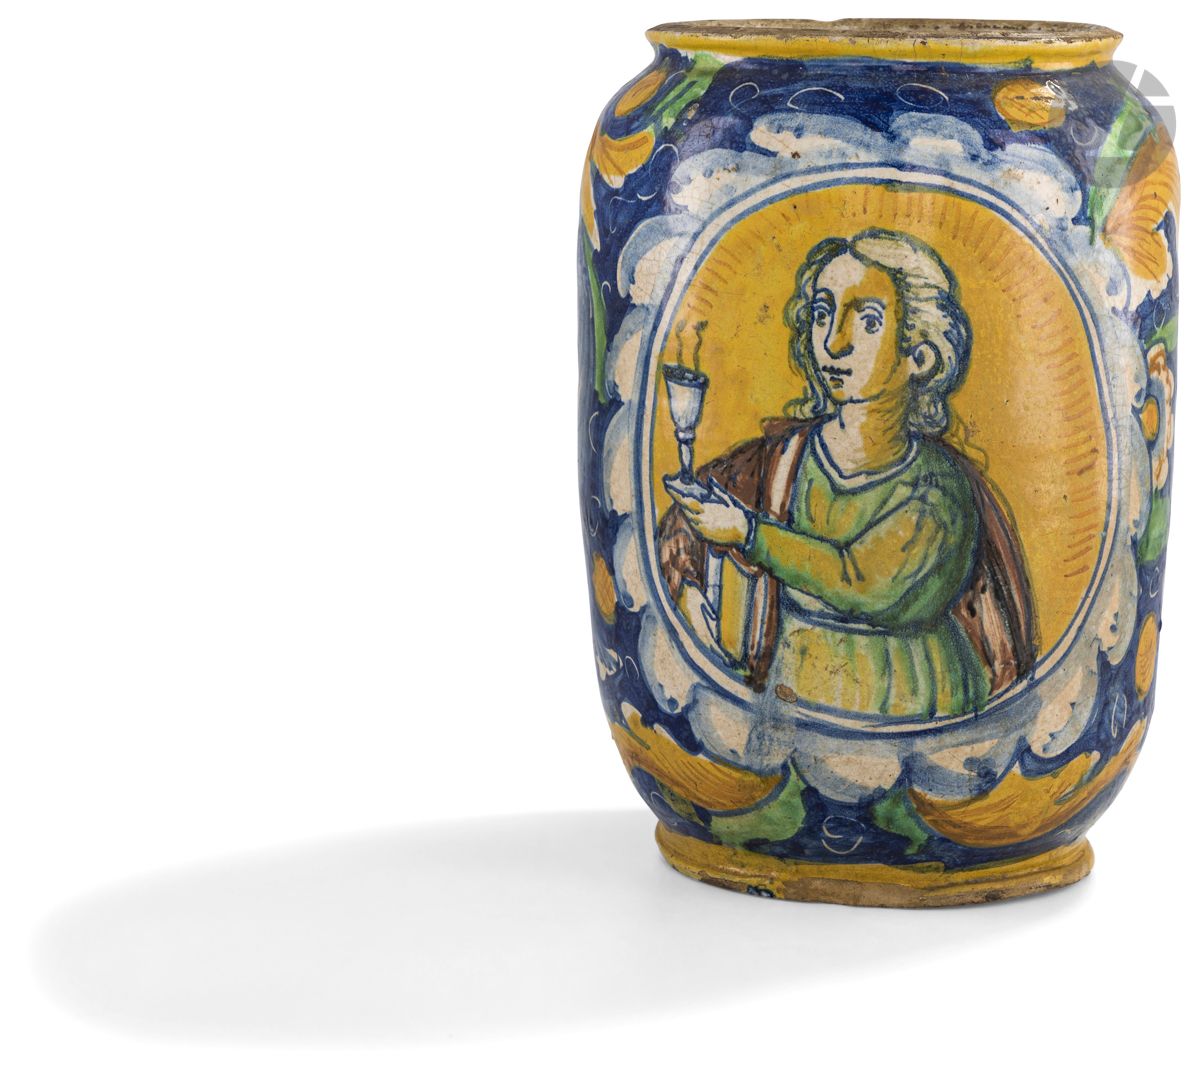 Null Gerace
Albarello earthenware with polychrome decoration of a saint holding &hellip;